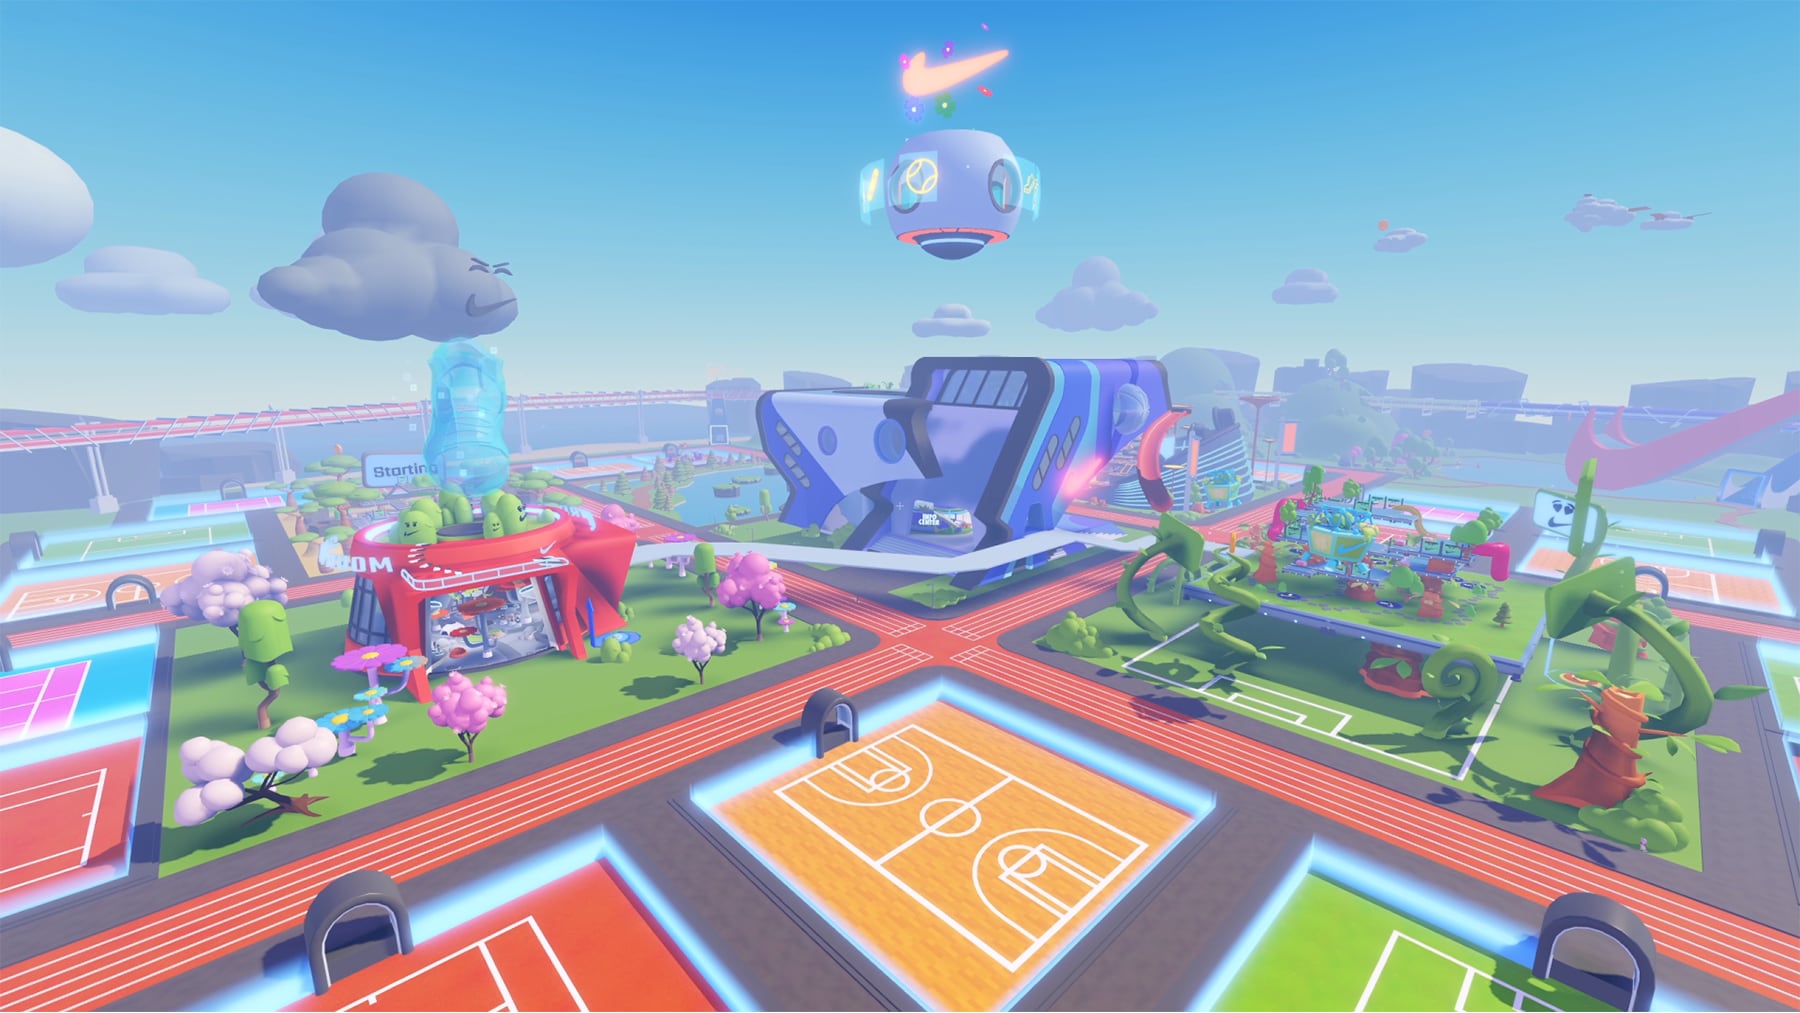 Nike has launched a virtual world on gaming platform Roblox.